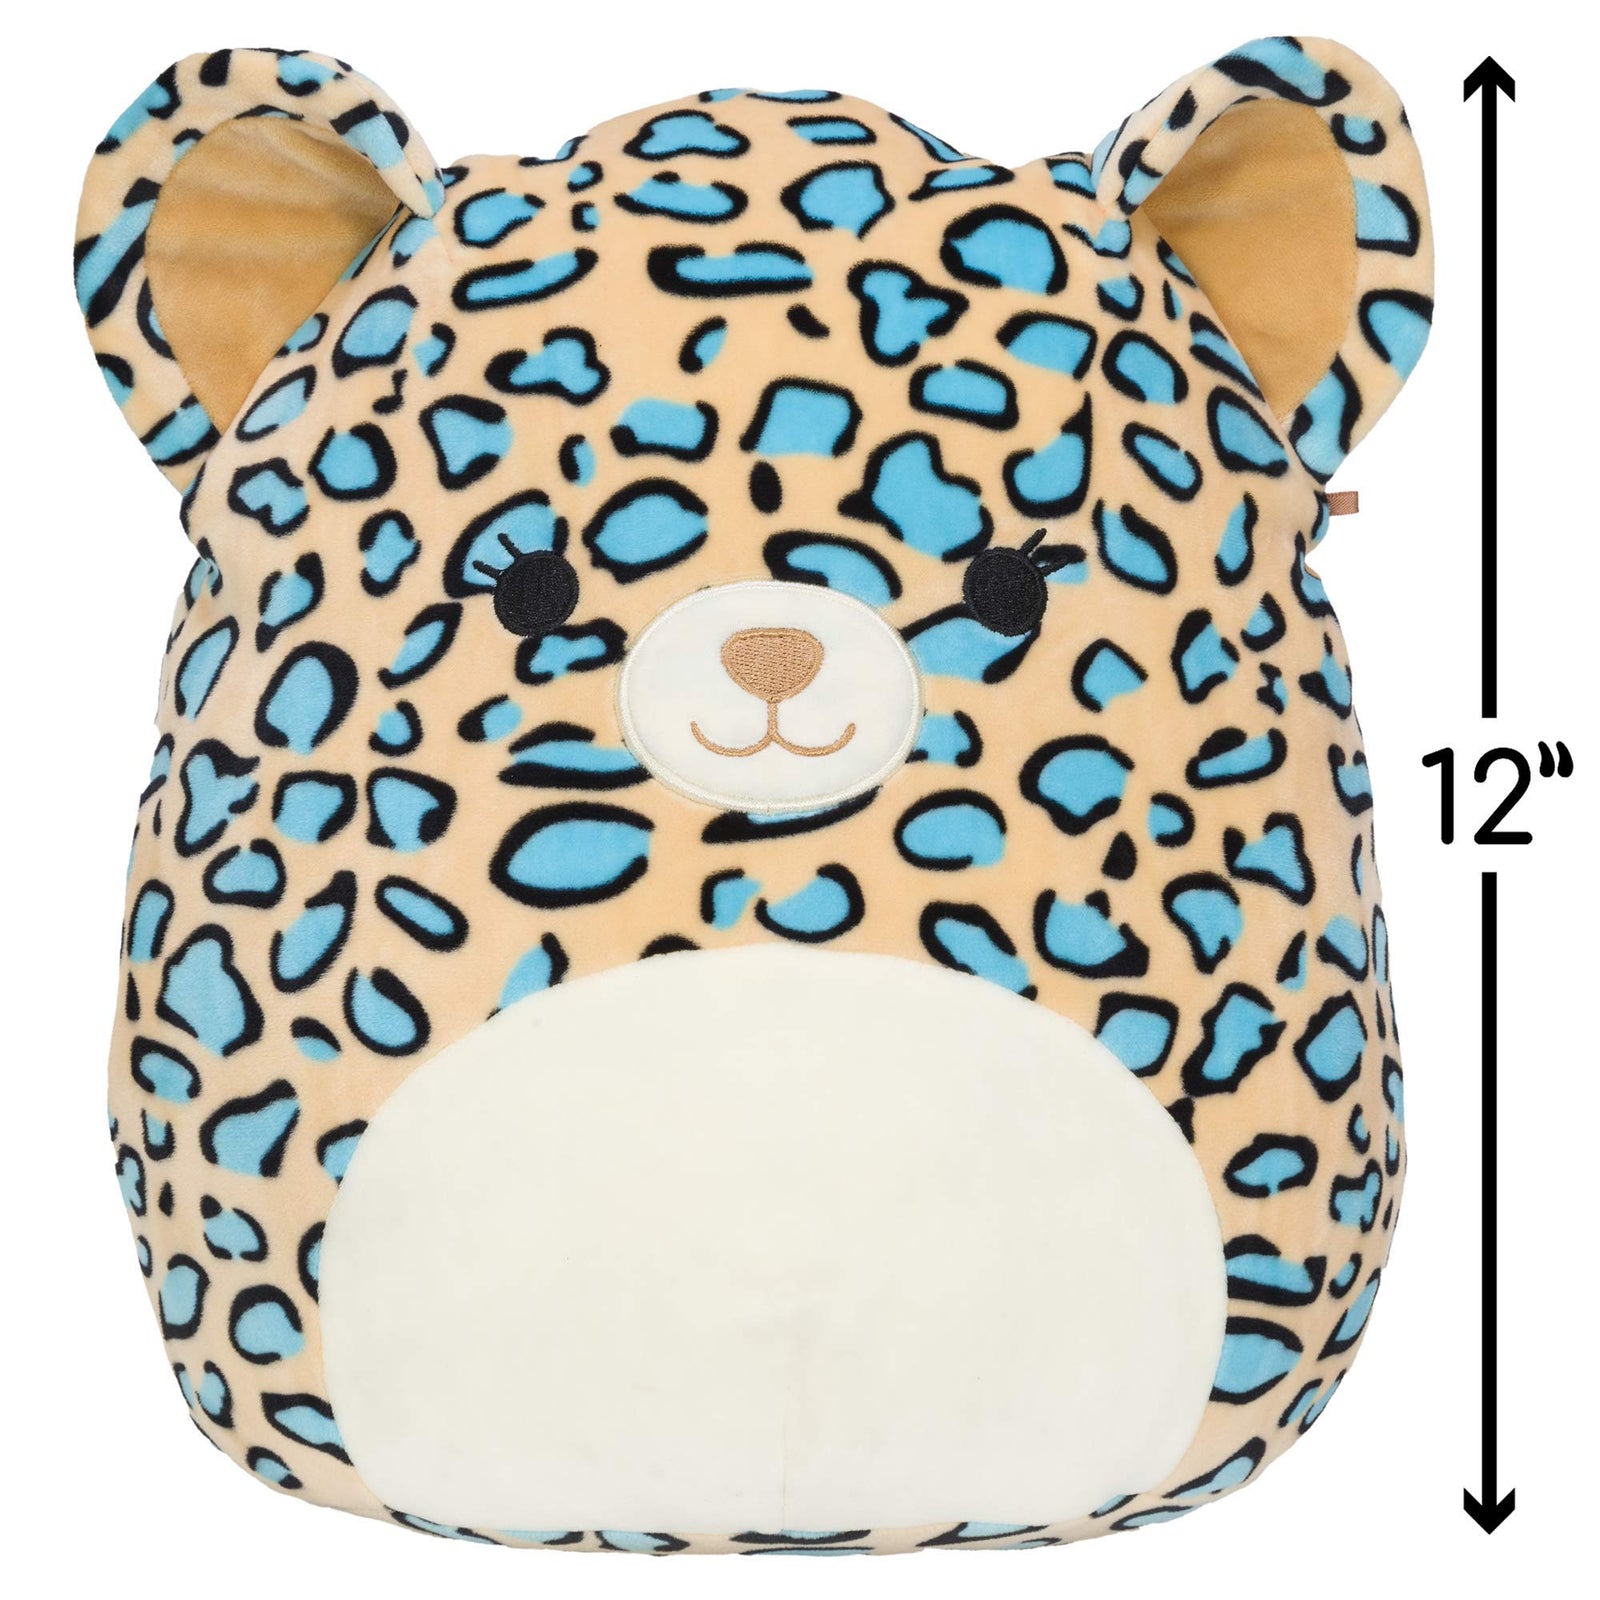 Squishmallow Official Kellytoy Plush 12" Liv The Teal Leopard - Ultrasoft Stuffed Animal Plush Toy